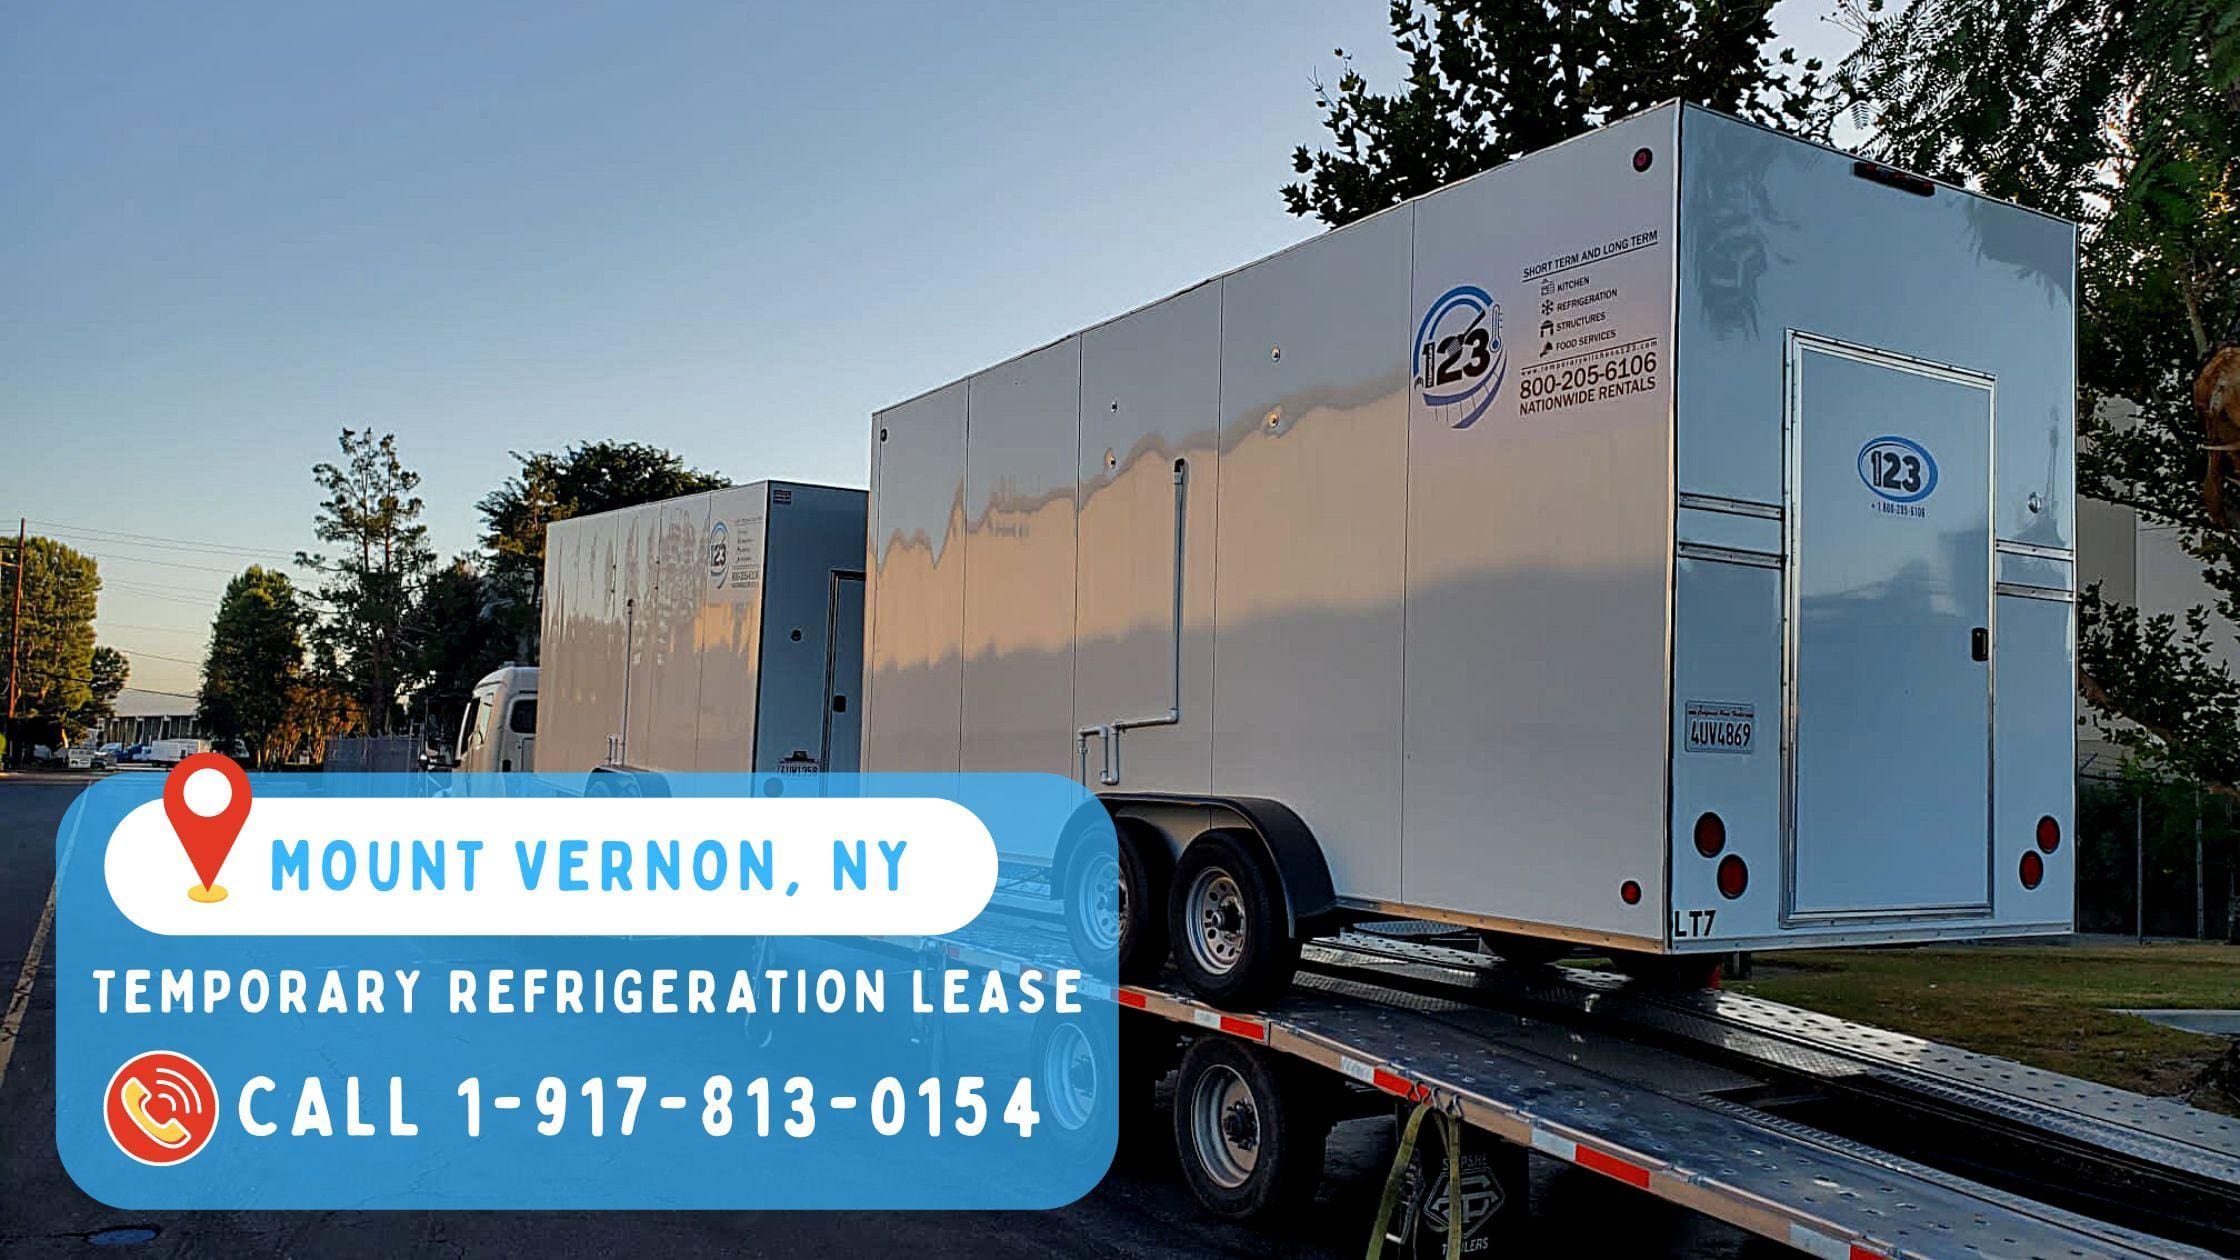 Temporary Refrigeration Lease in Mount Vernon